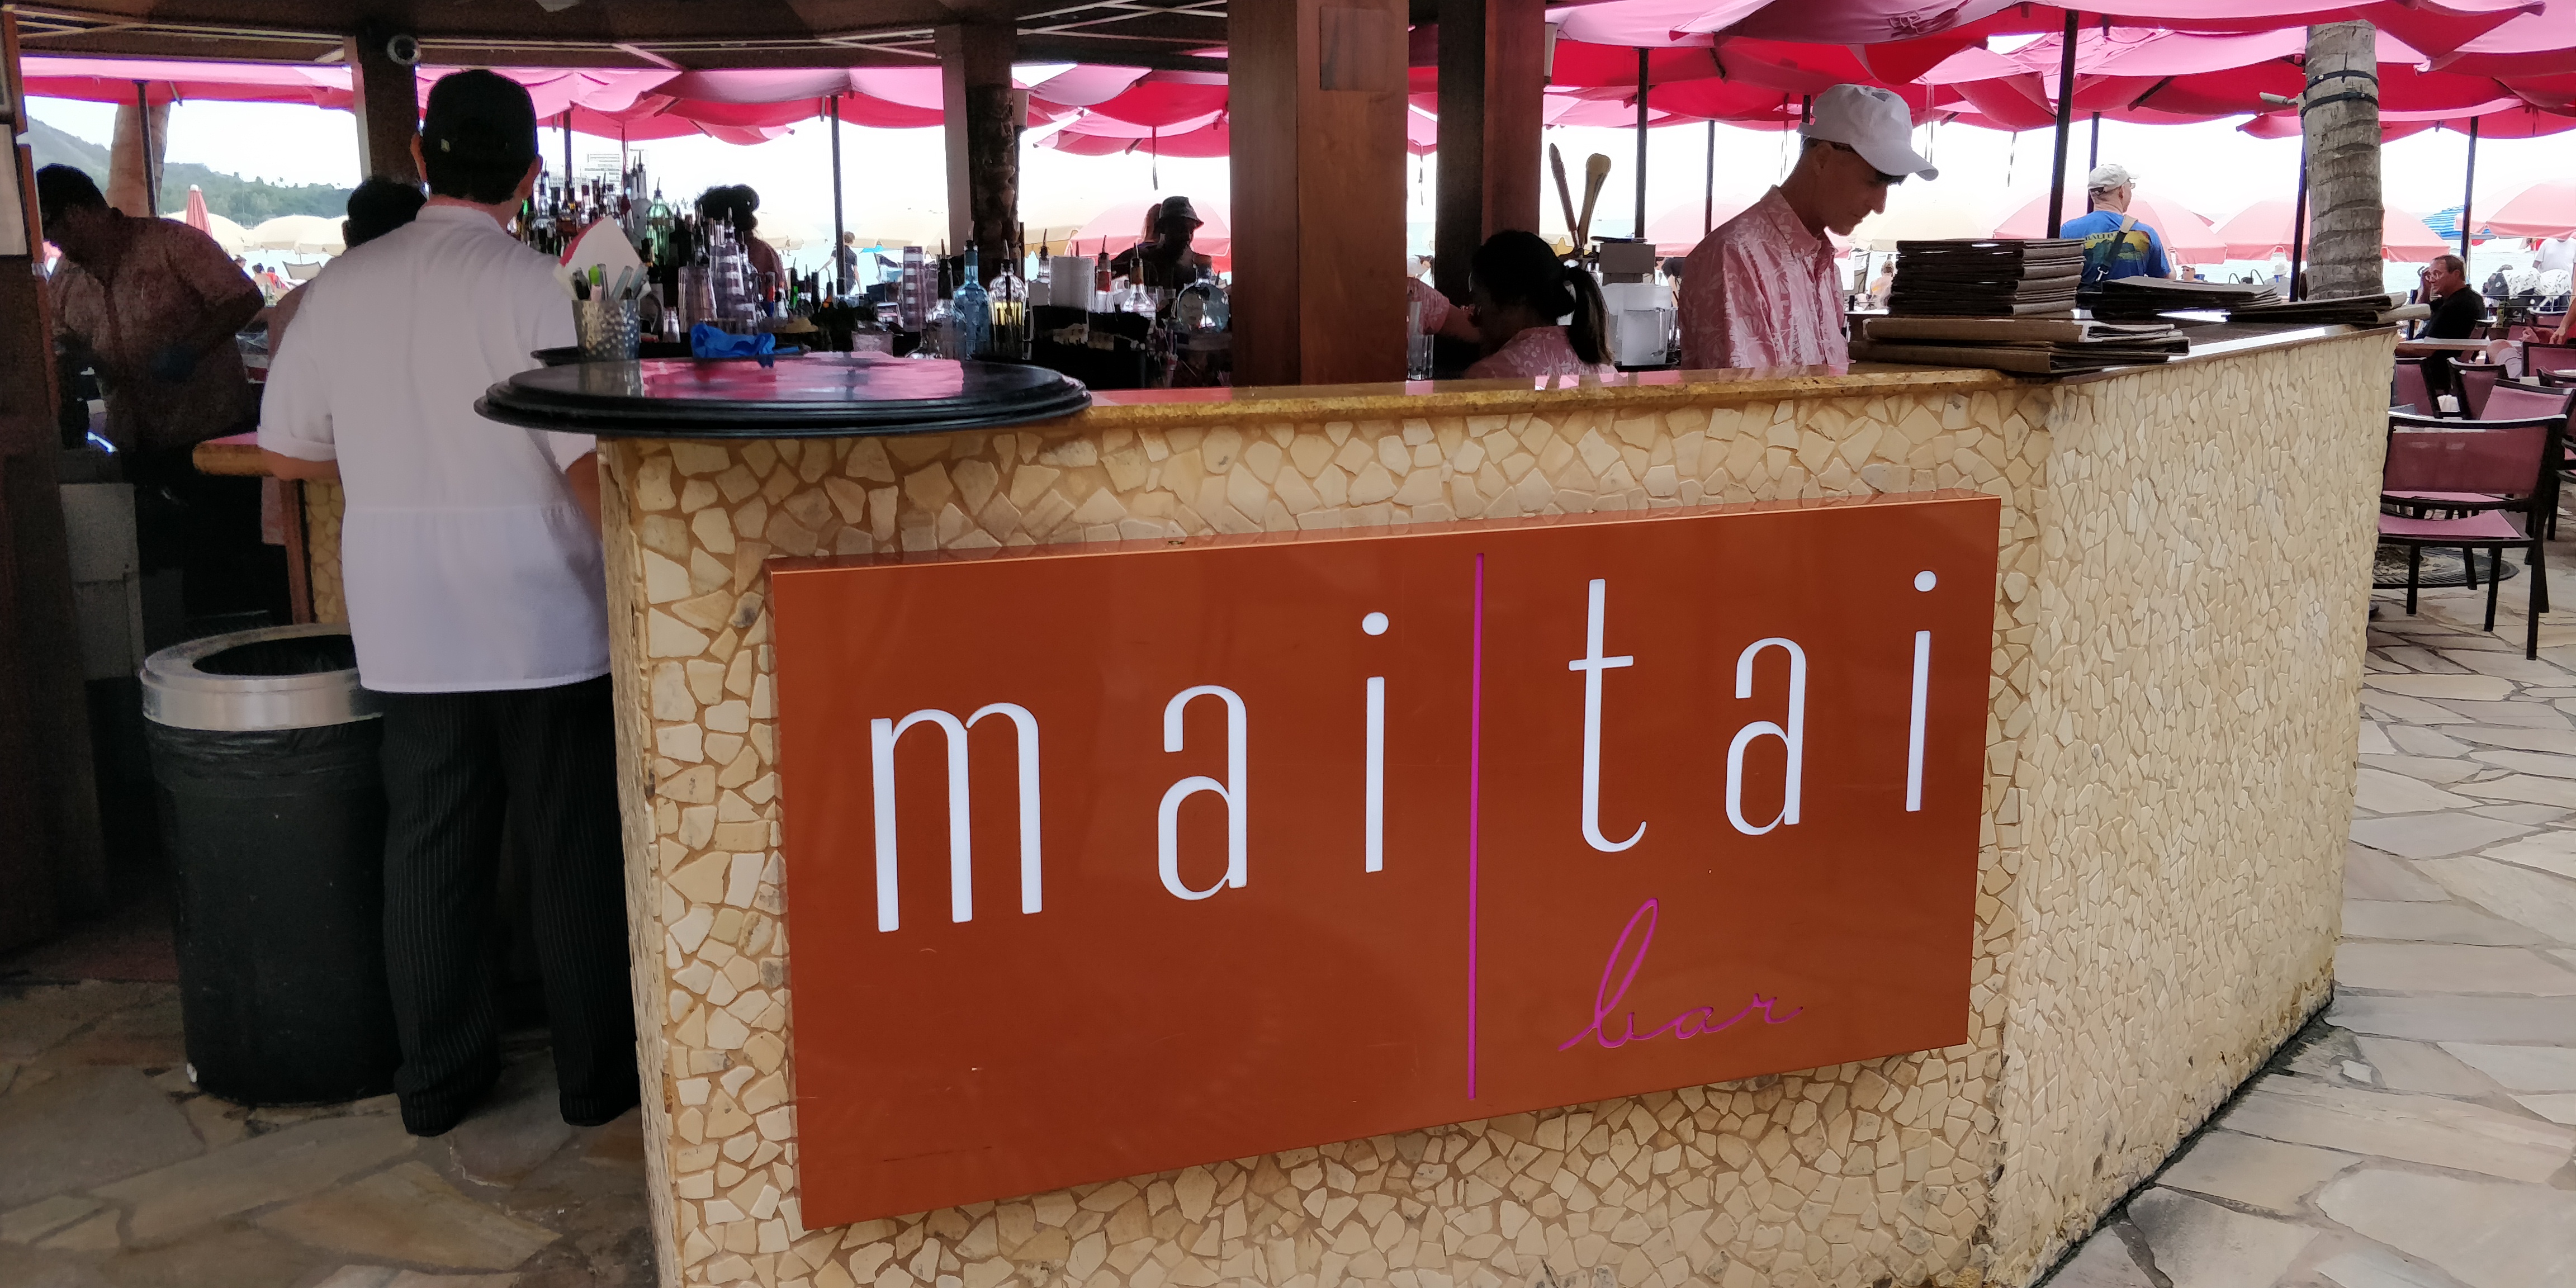  A PICTURE OF THE MAI TAI BAR